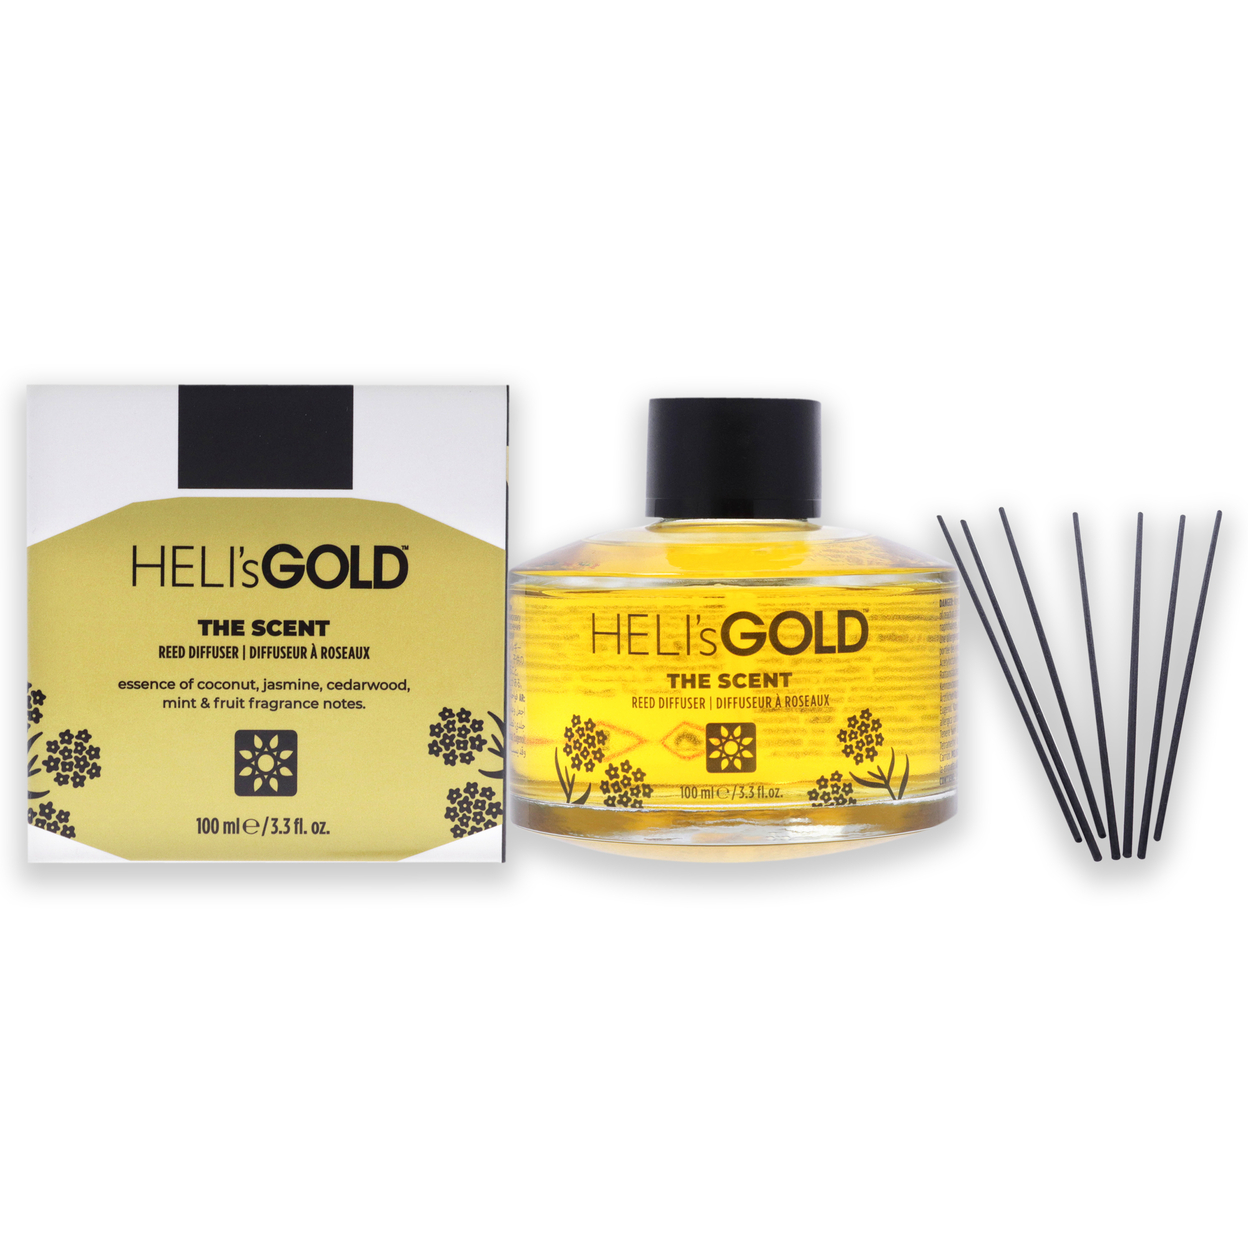 Helis Gold The Scent Reed Difuser Set 3.3oz Diffuser, 7 Pc Fiber Stick 2 Pc